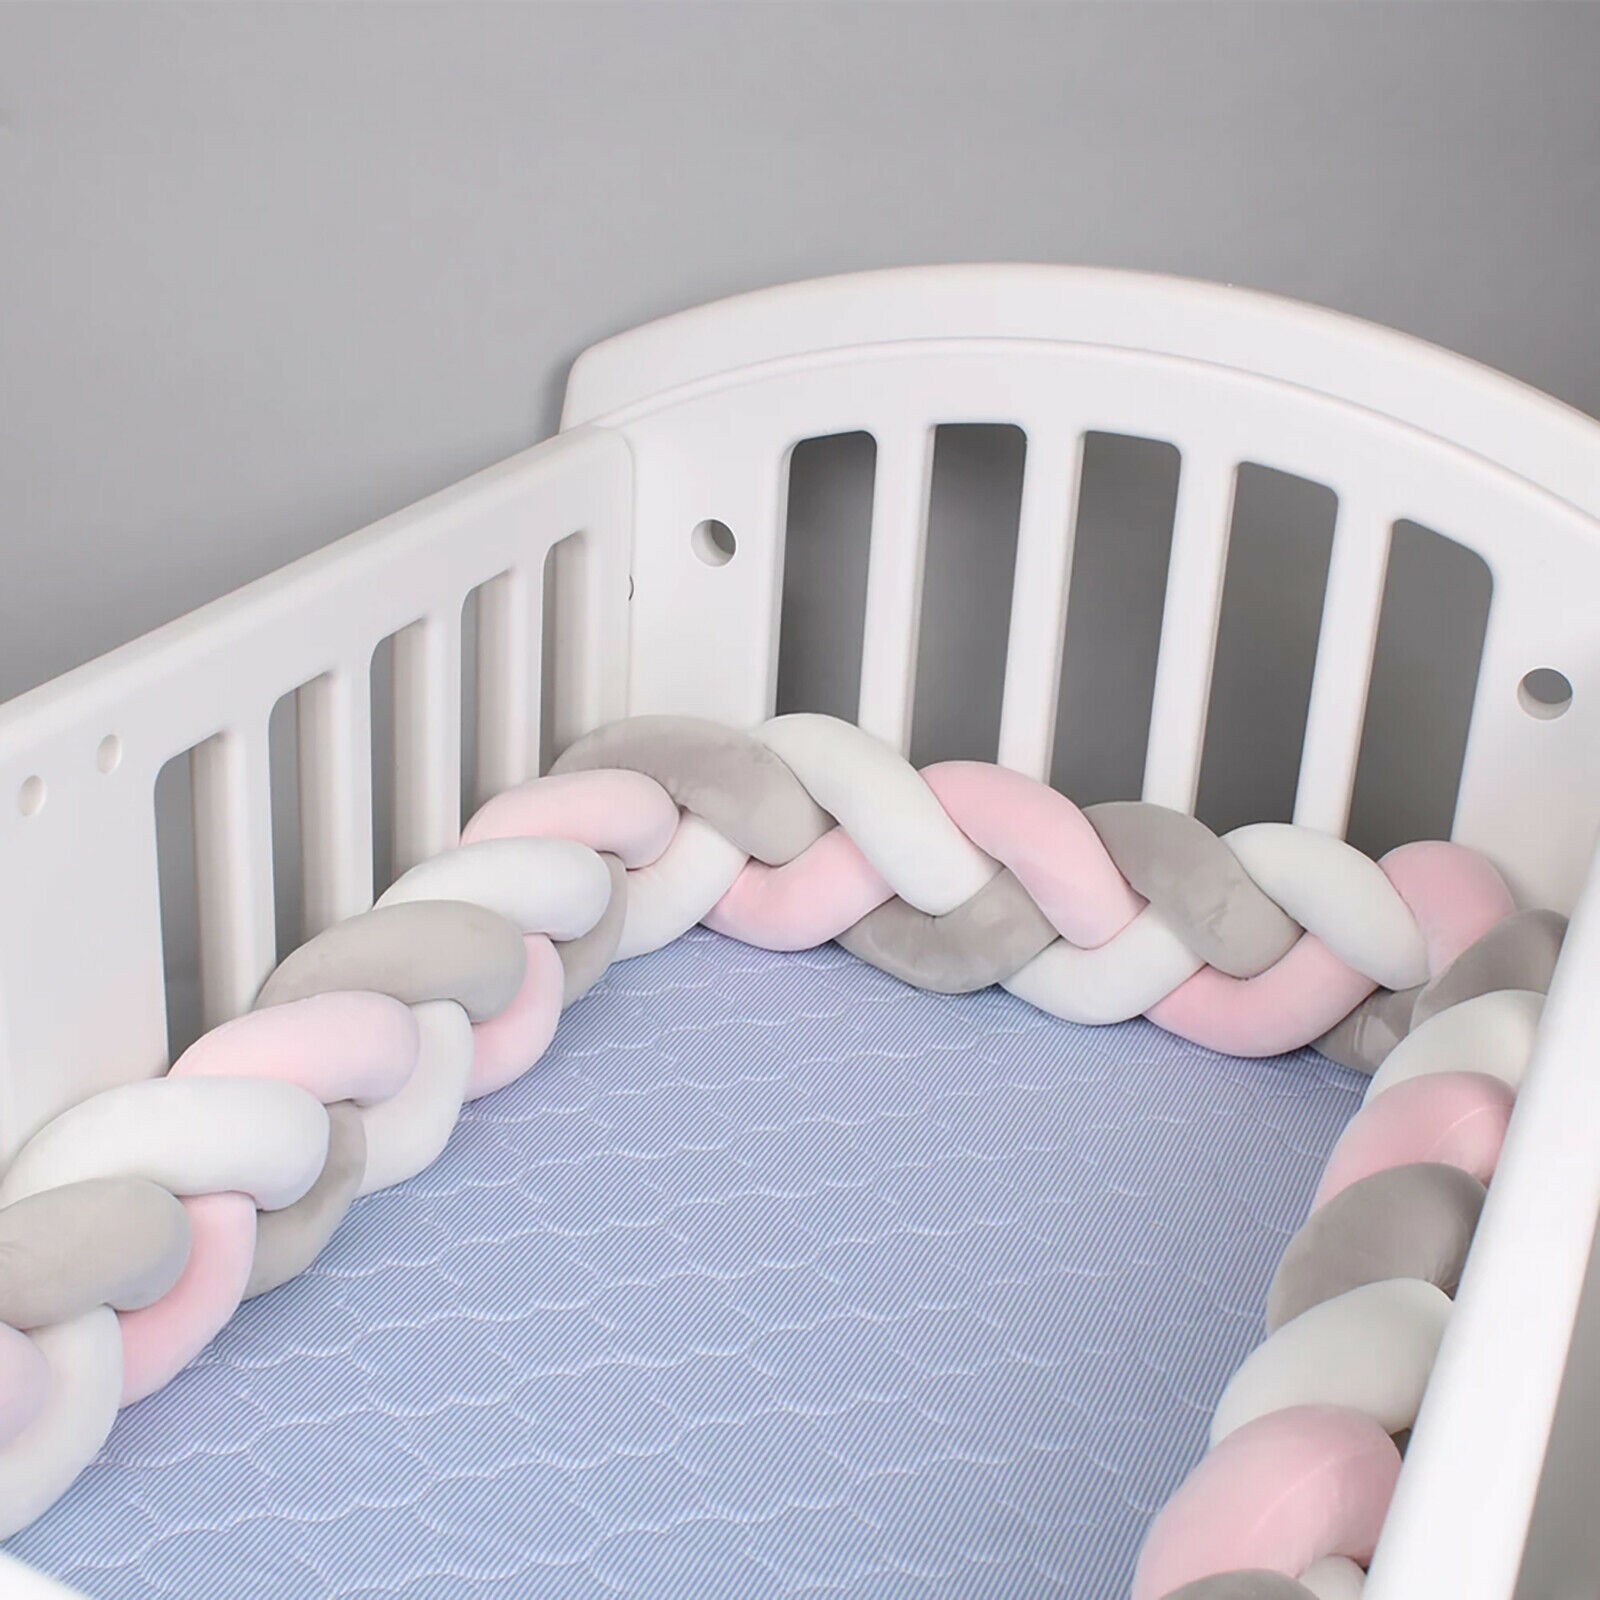 Image 61 - Crib Protector Baby Bed Bumper 3-Strand Knot Newborn Cushions Home Decor Pillow